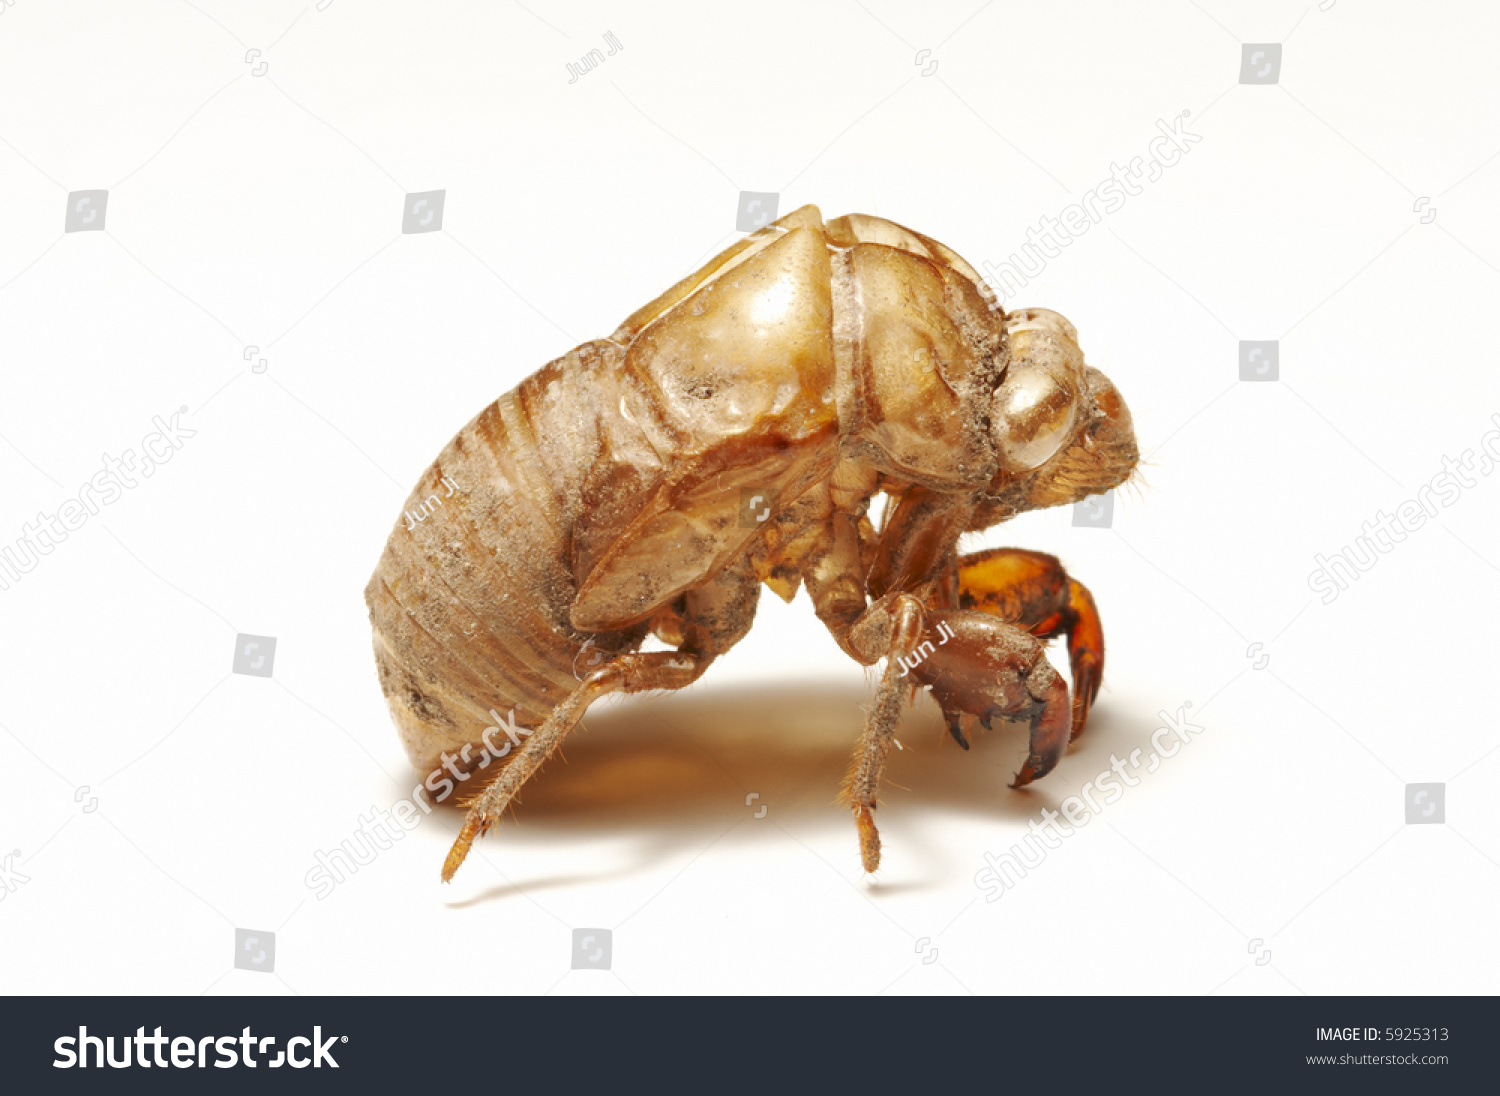 stock-photo-close-up-view-of-an-empty-cicada-shell-on-white-background-5925313.jpg